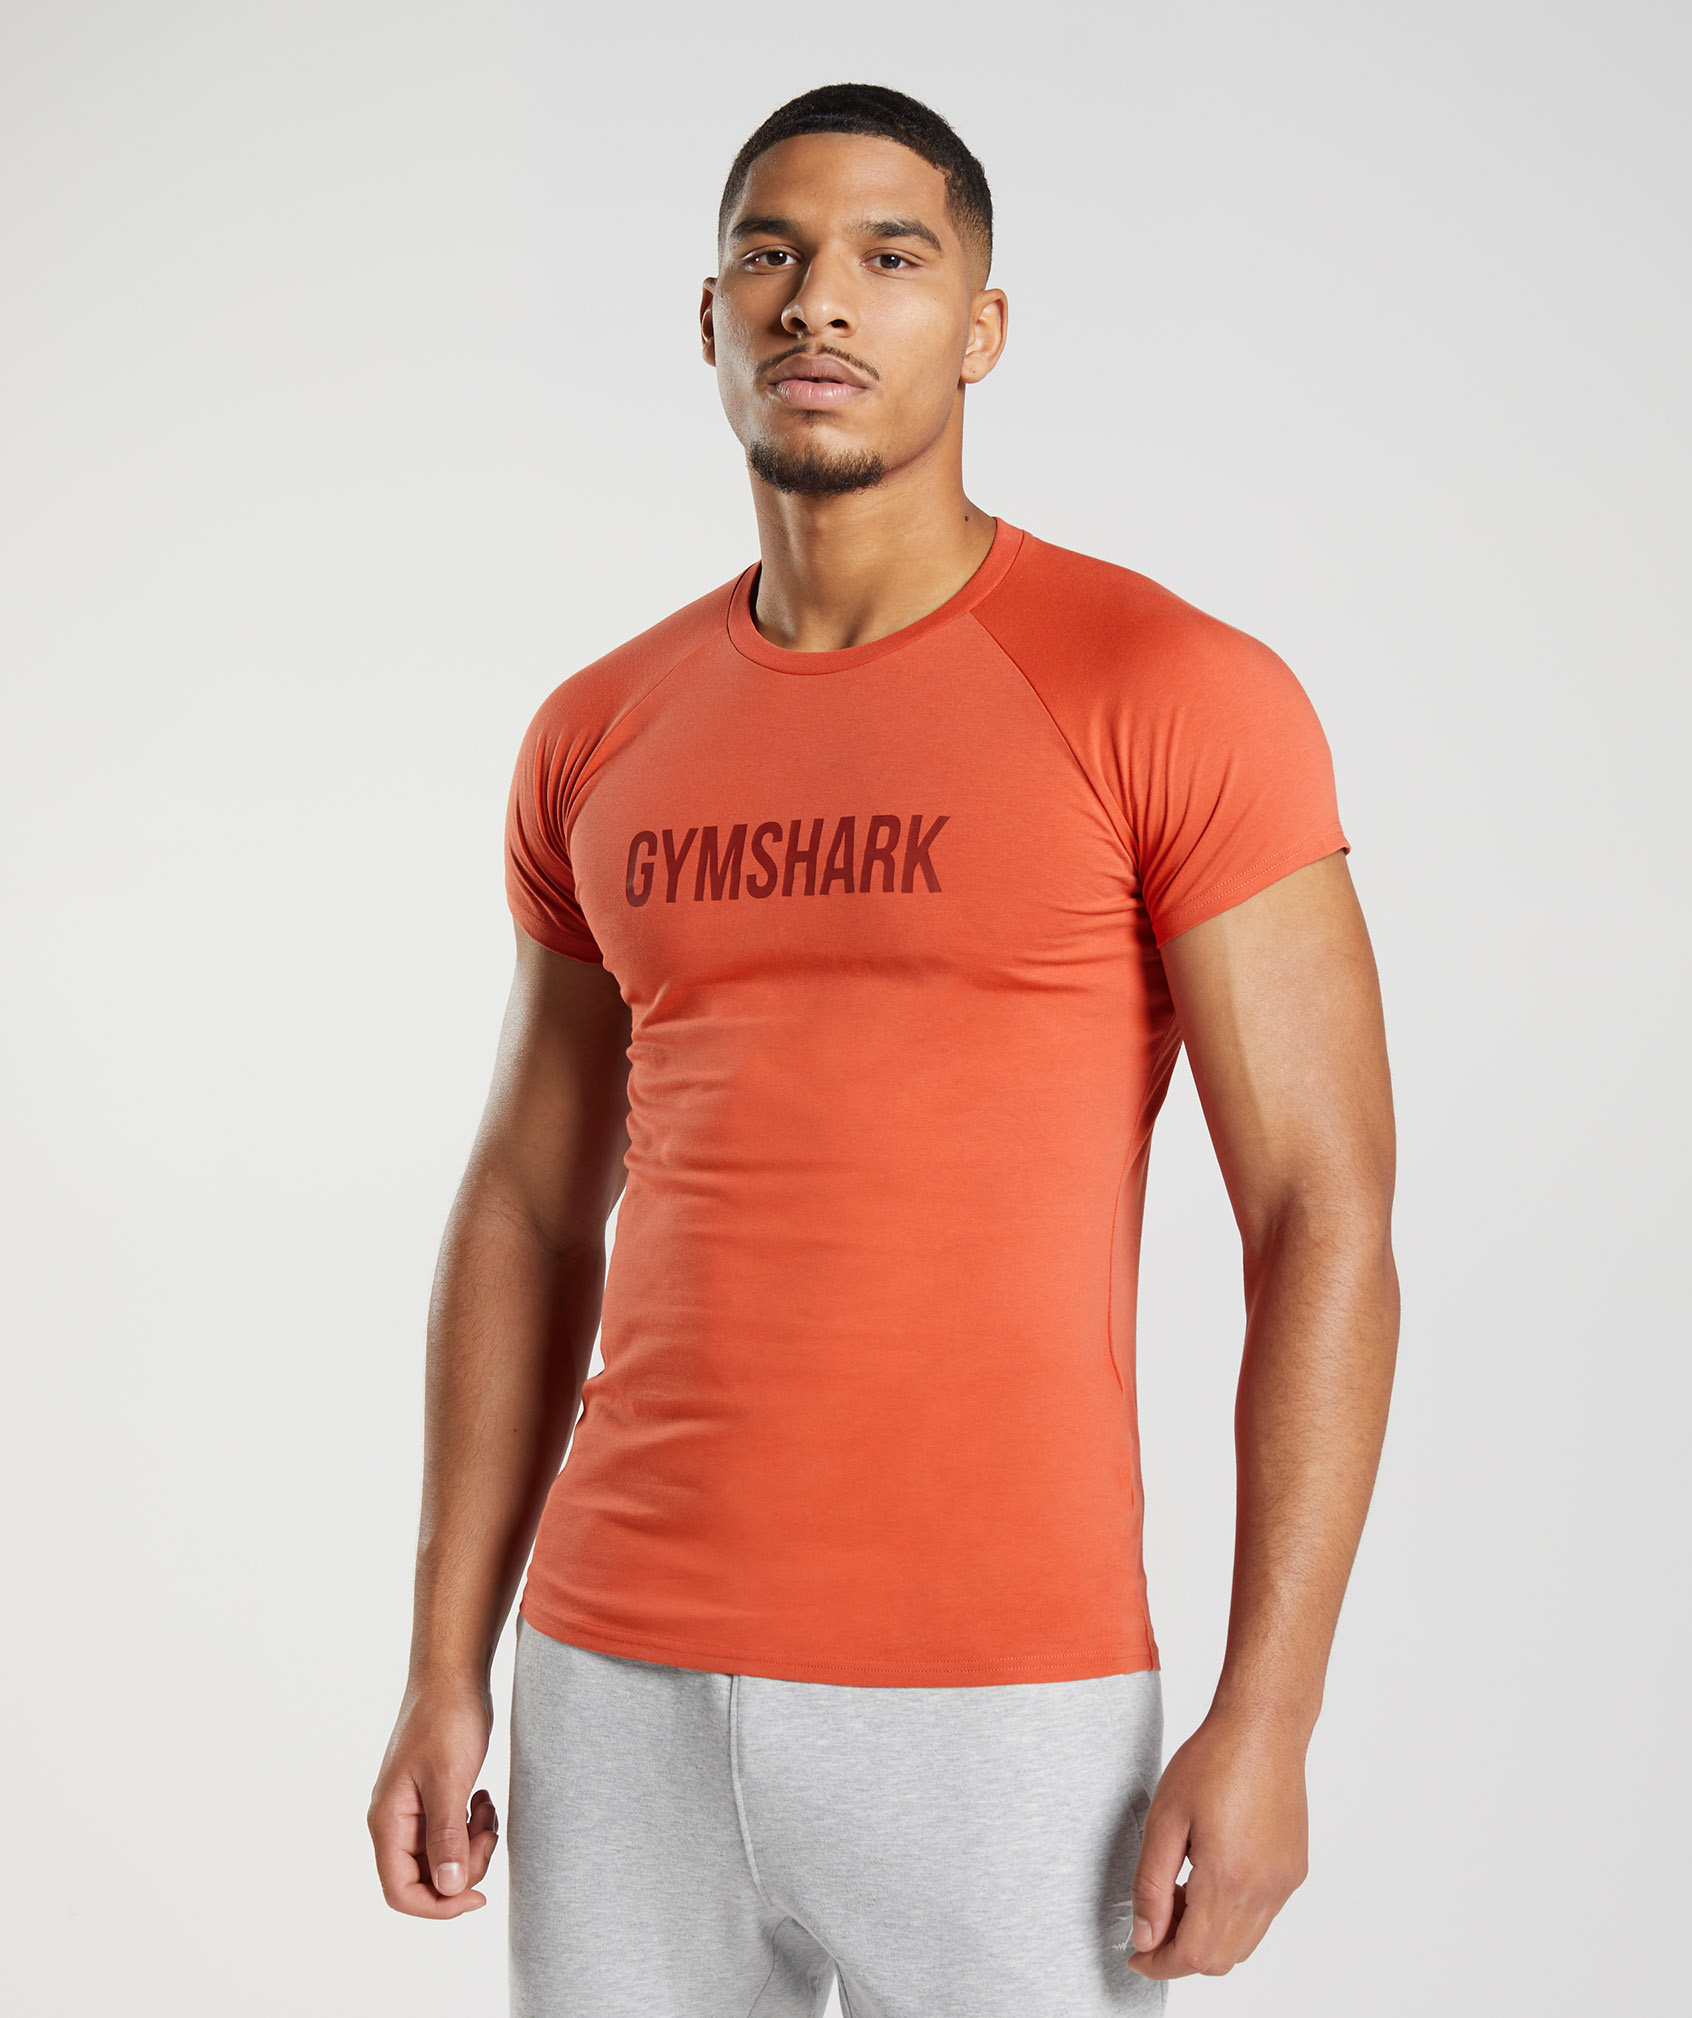 Probably At Orange Theory Workout Gym Fitness Long Sleeve T-Shirt